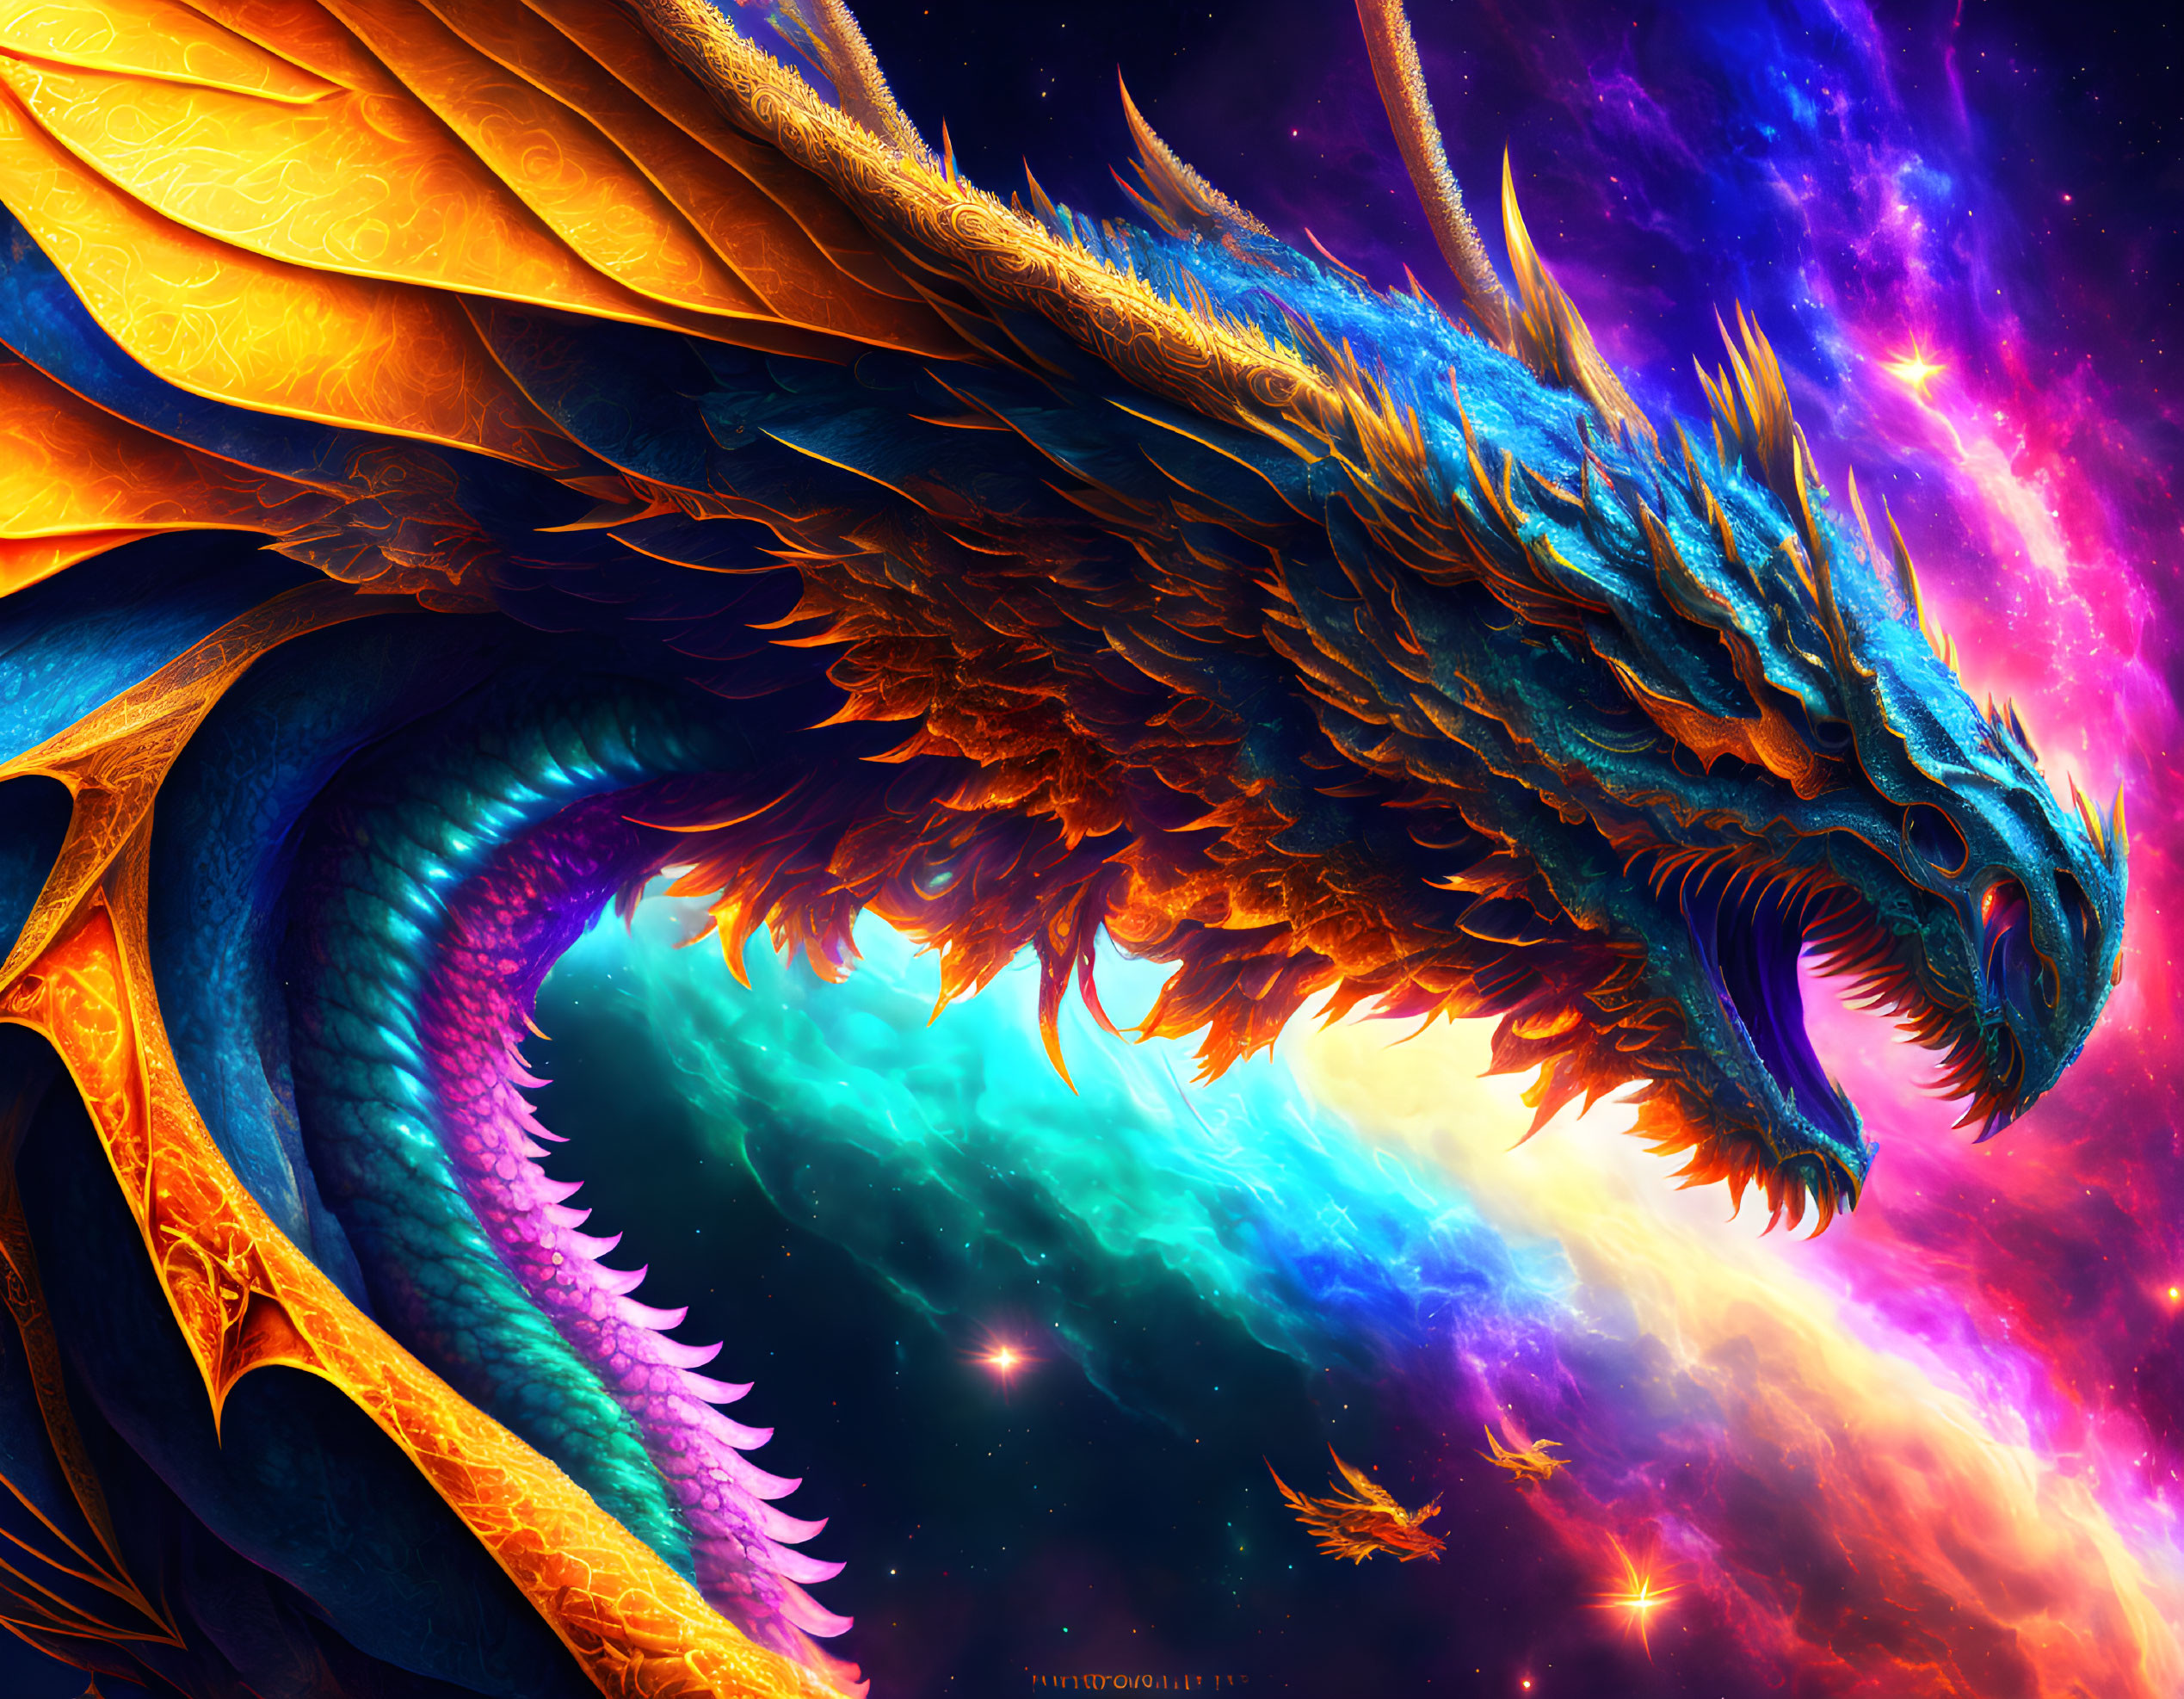 Blue dragon digital artwork with golden accents in cosmic sky